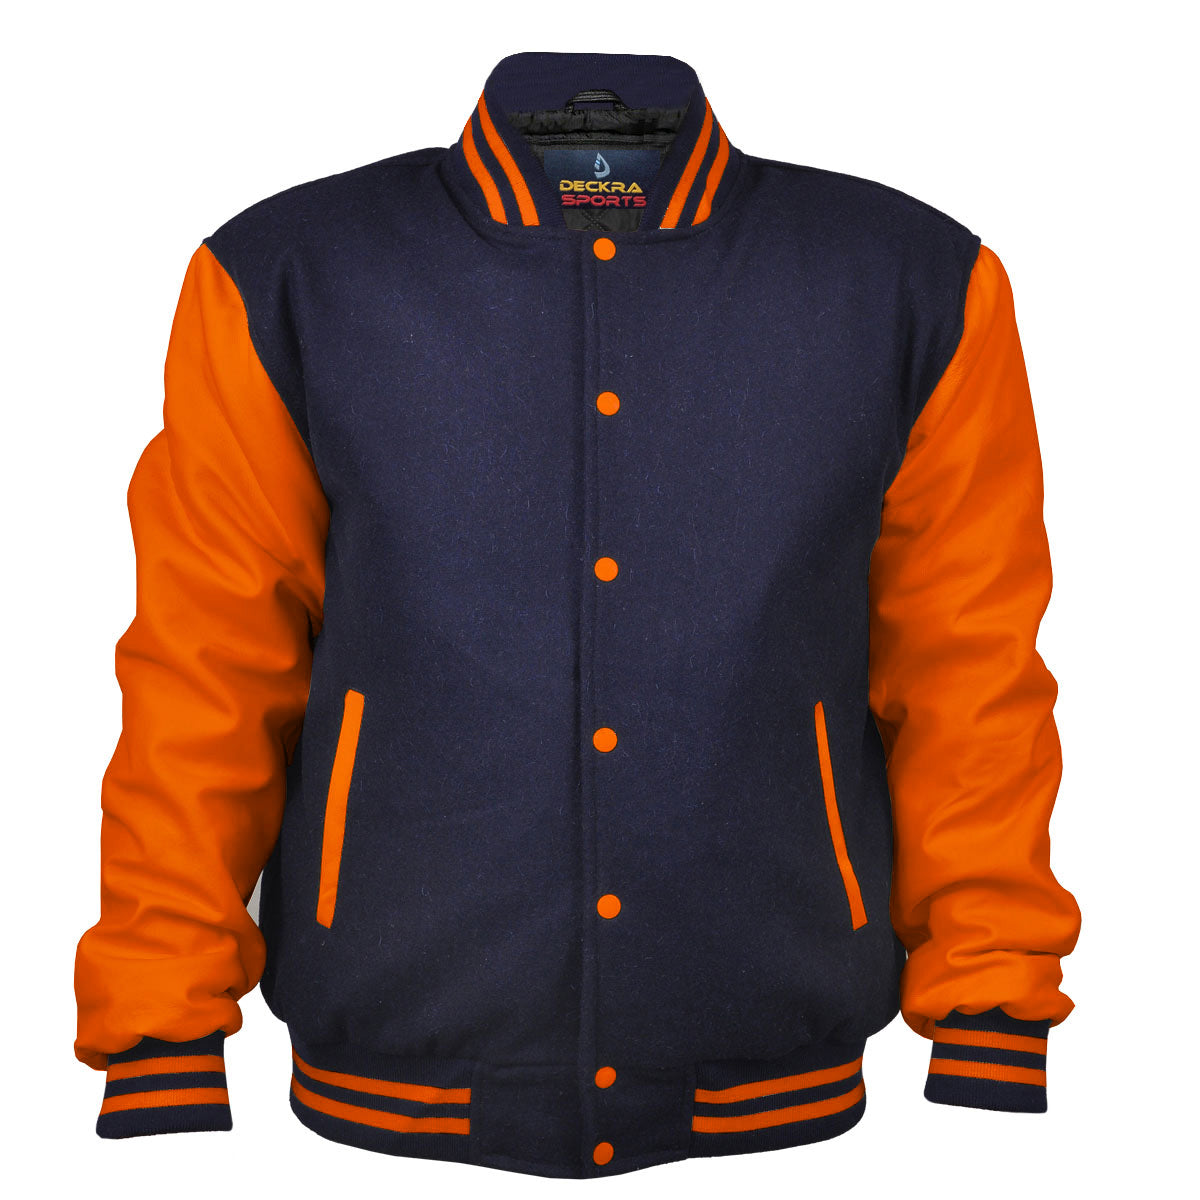 Off-white Appliquéd Wool-blend And Leather Varsity Jacket In Blue And Orange  | ModeSens | Leather varsity jackets, Varsity jacket, Color block jacket